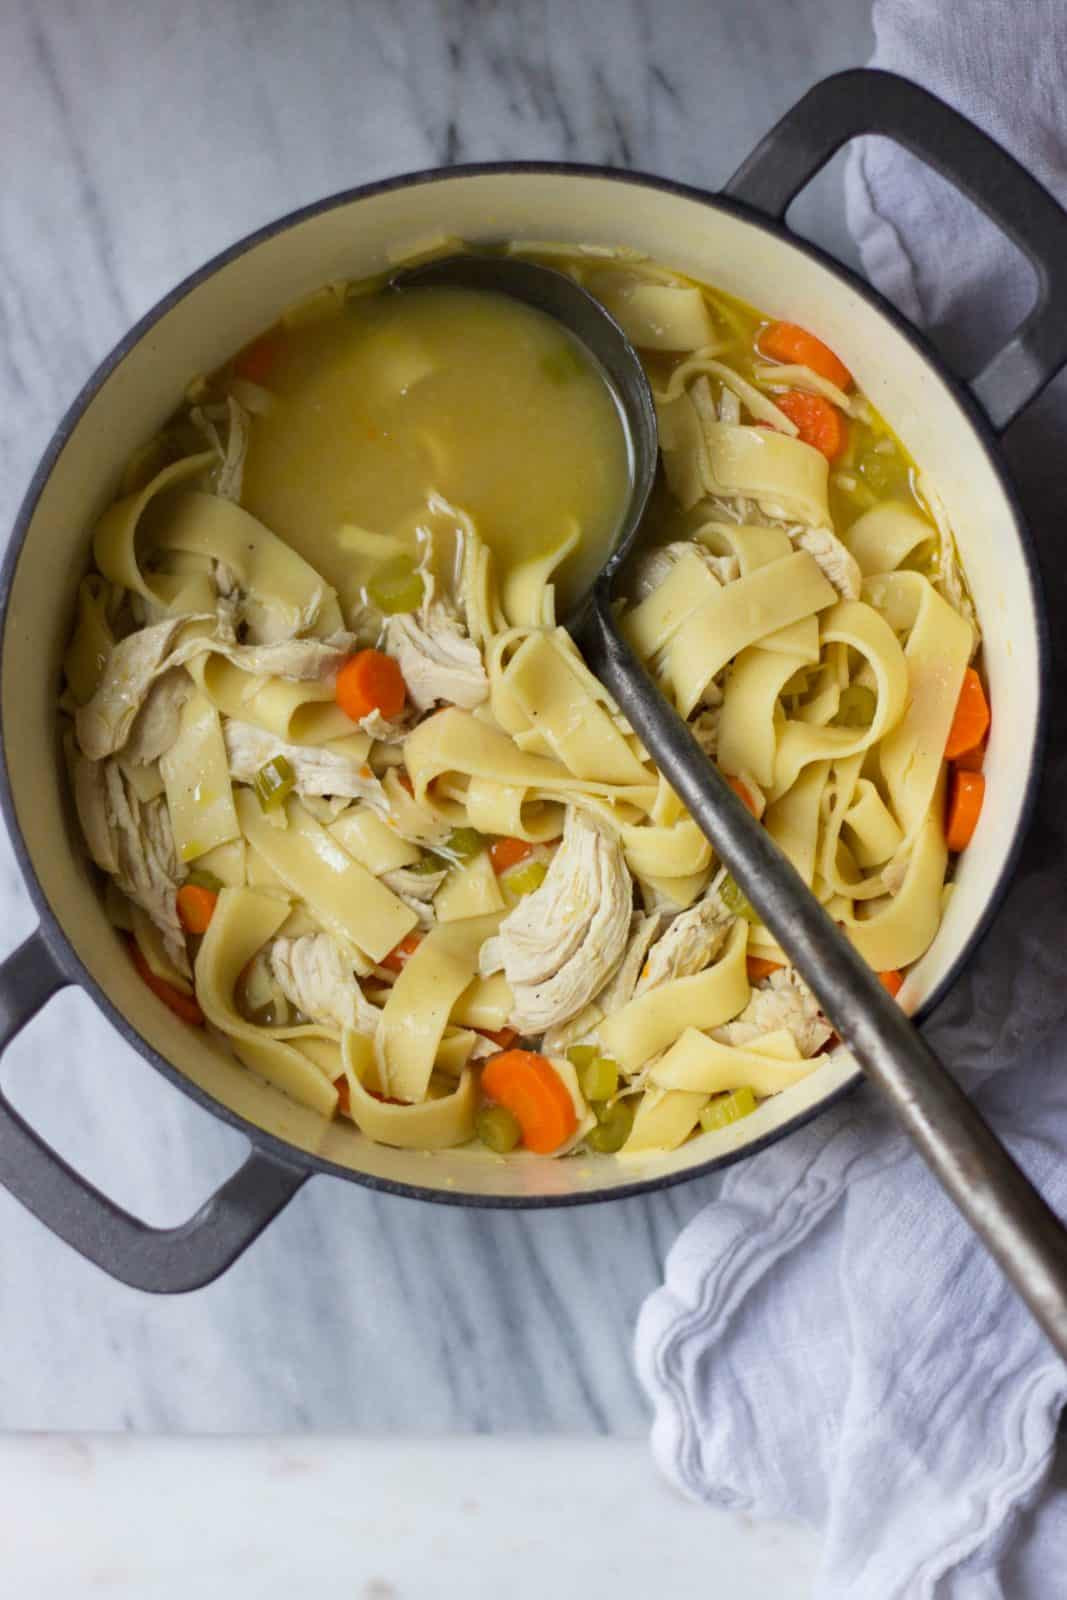 Gourmet Chicken Noodle Soup
 Old Fashioned Chicken Noodle Soup The Gourmet RD